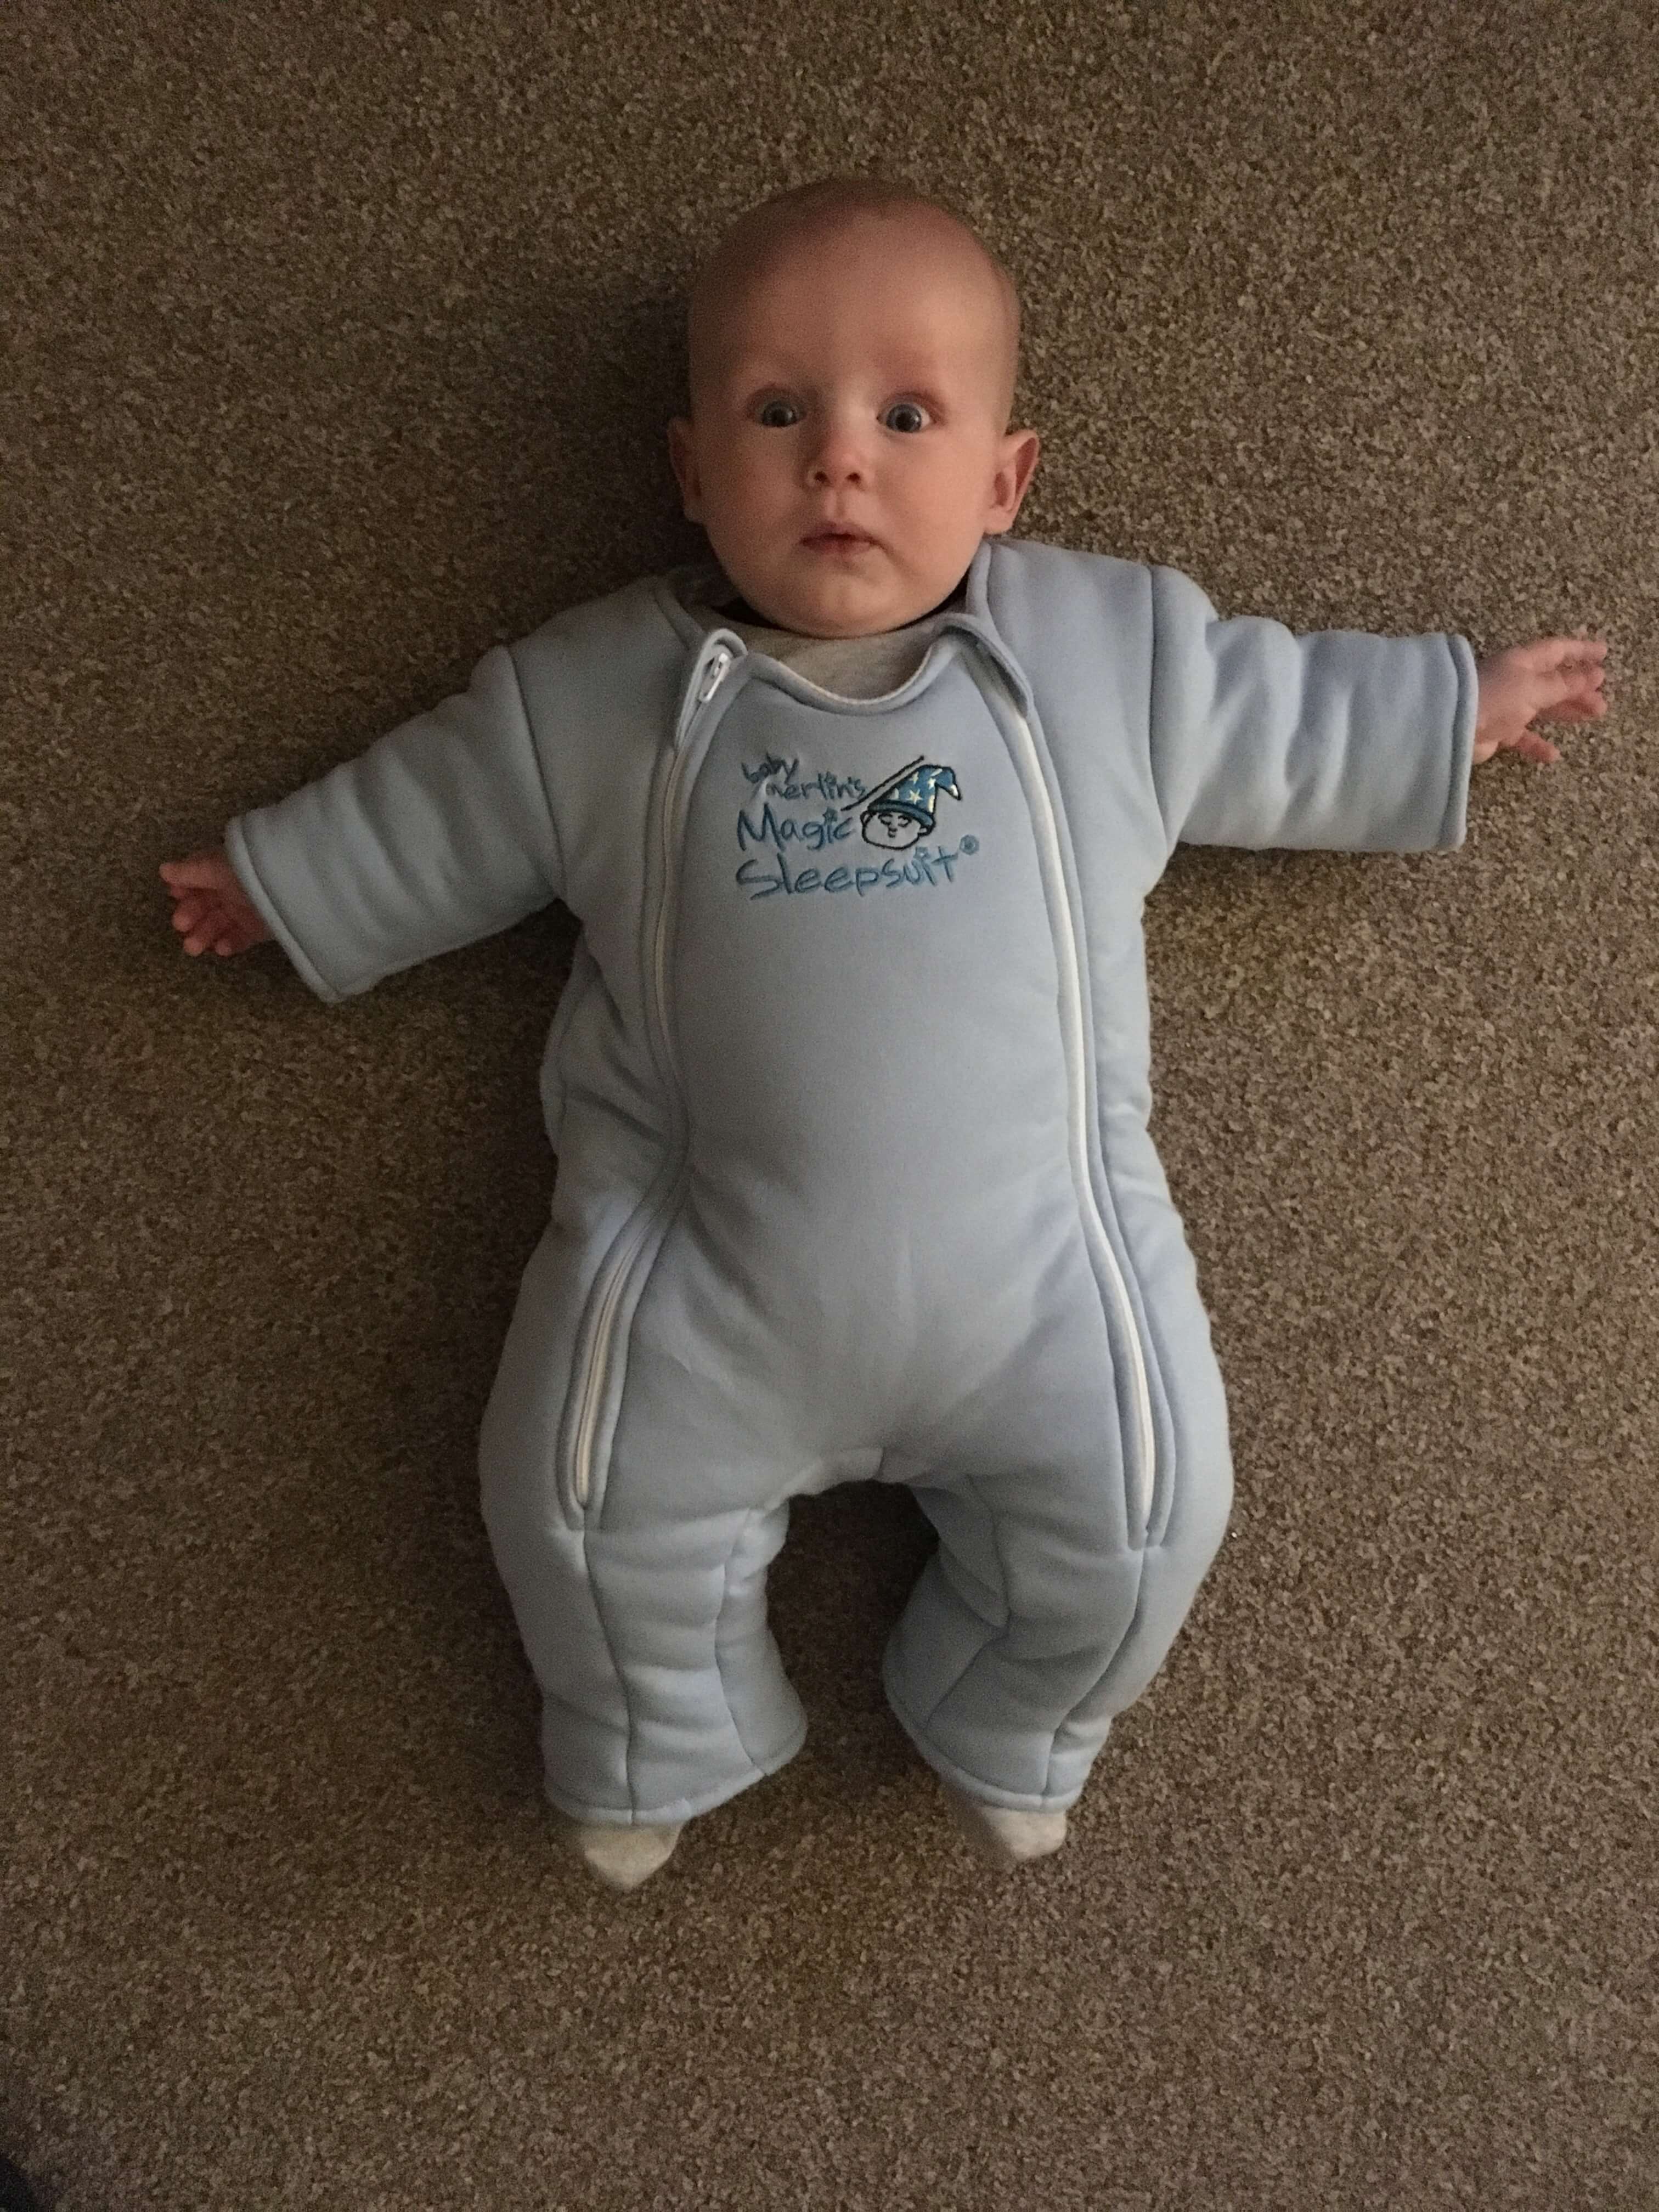 Magic Sleepsuit Review - How to Daddoo